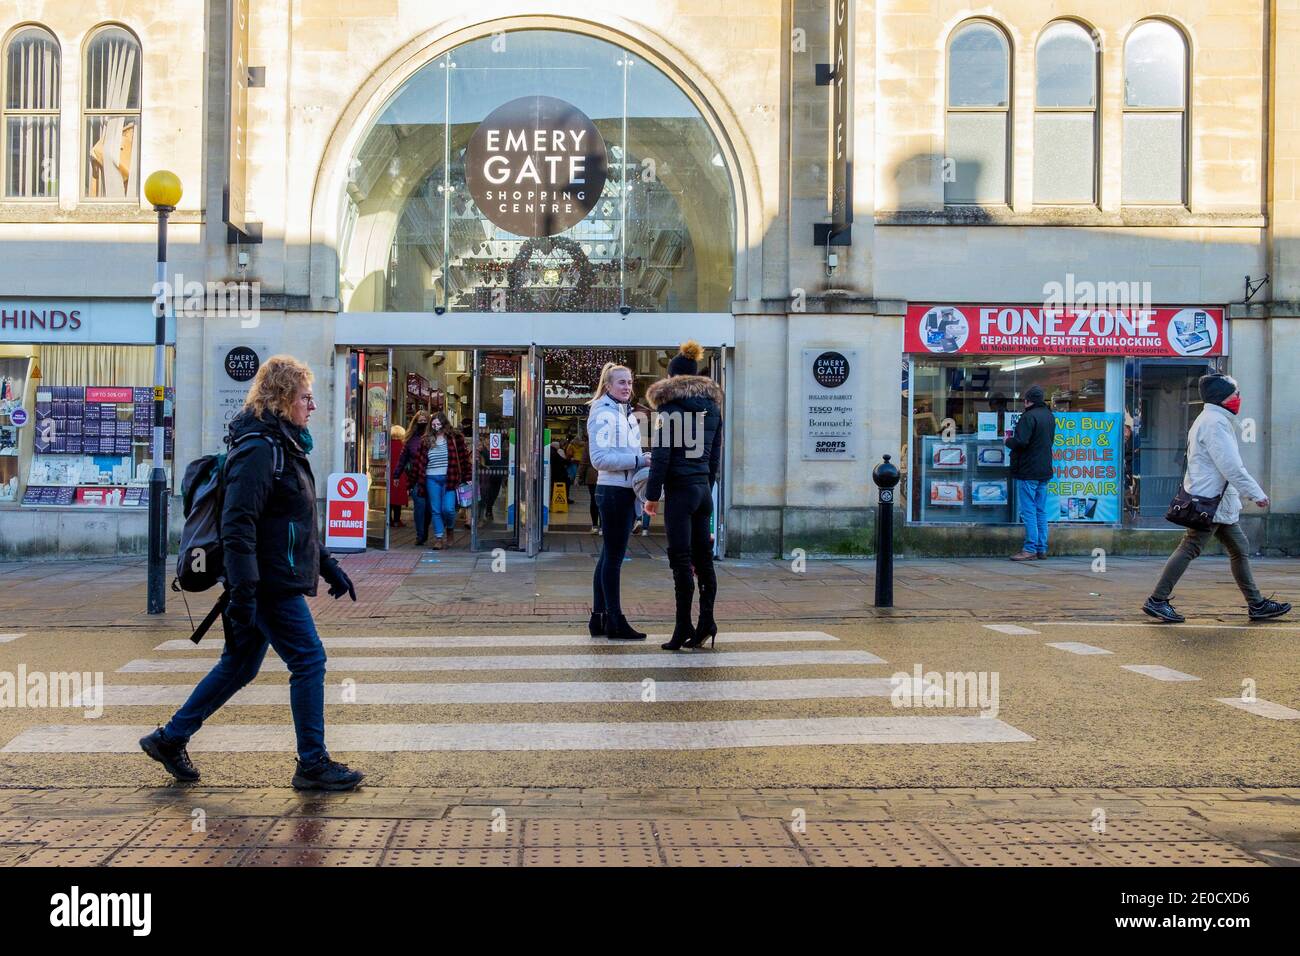 Chippenham, Wiltshire, UK. 31st December, 2020. With most areas of England in COVID protection level 4, shoppers in Chippenham, Wiltshire which is in COVID protection level 3 are pictured on the last day of 2020 as they make the most of the freedoms that level 3 allows.  Credit: Lynchpics/Alamy Live News Stock Photo